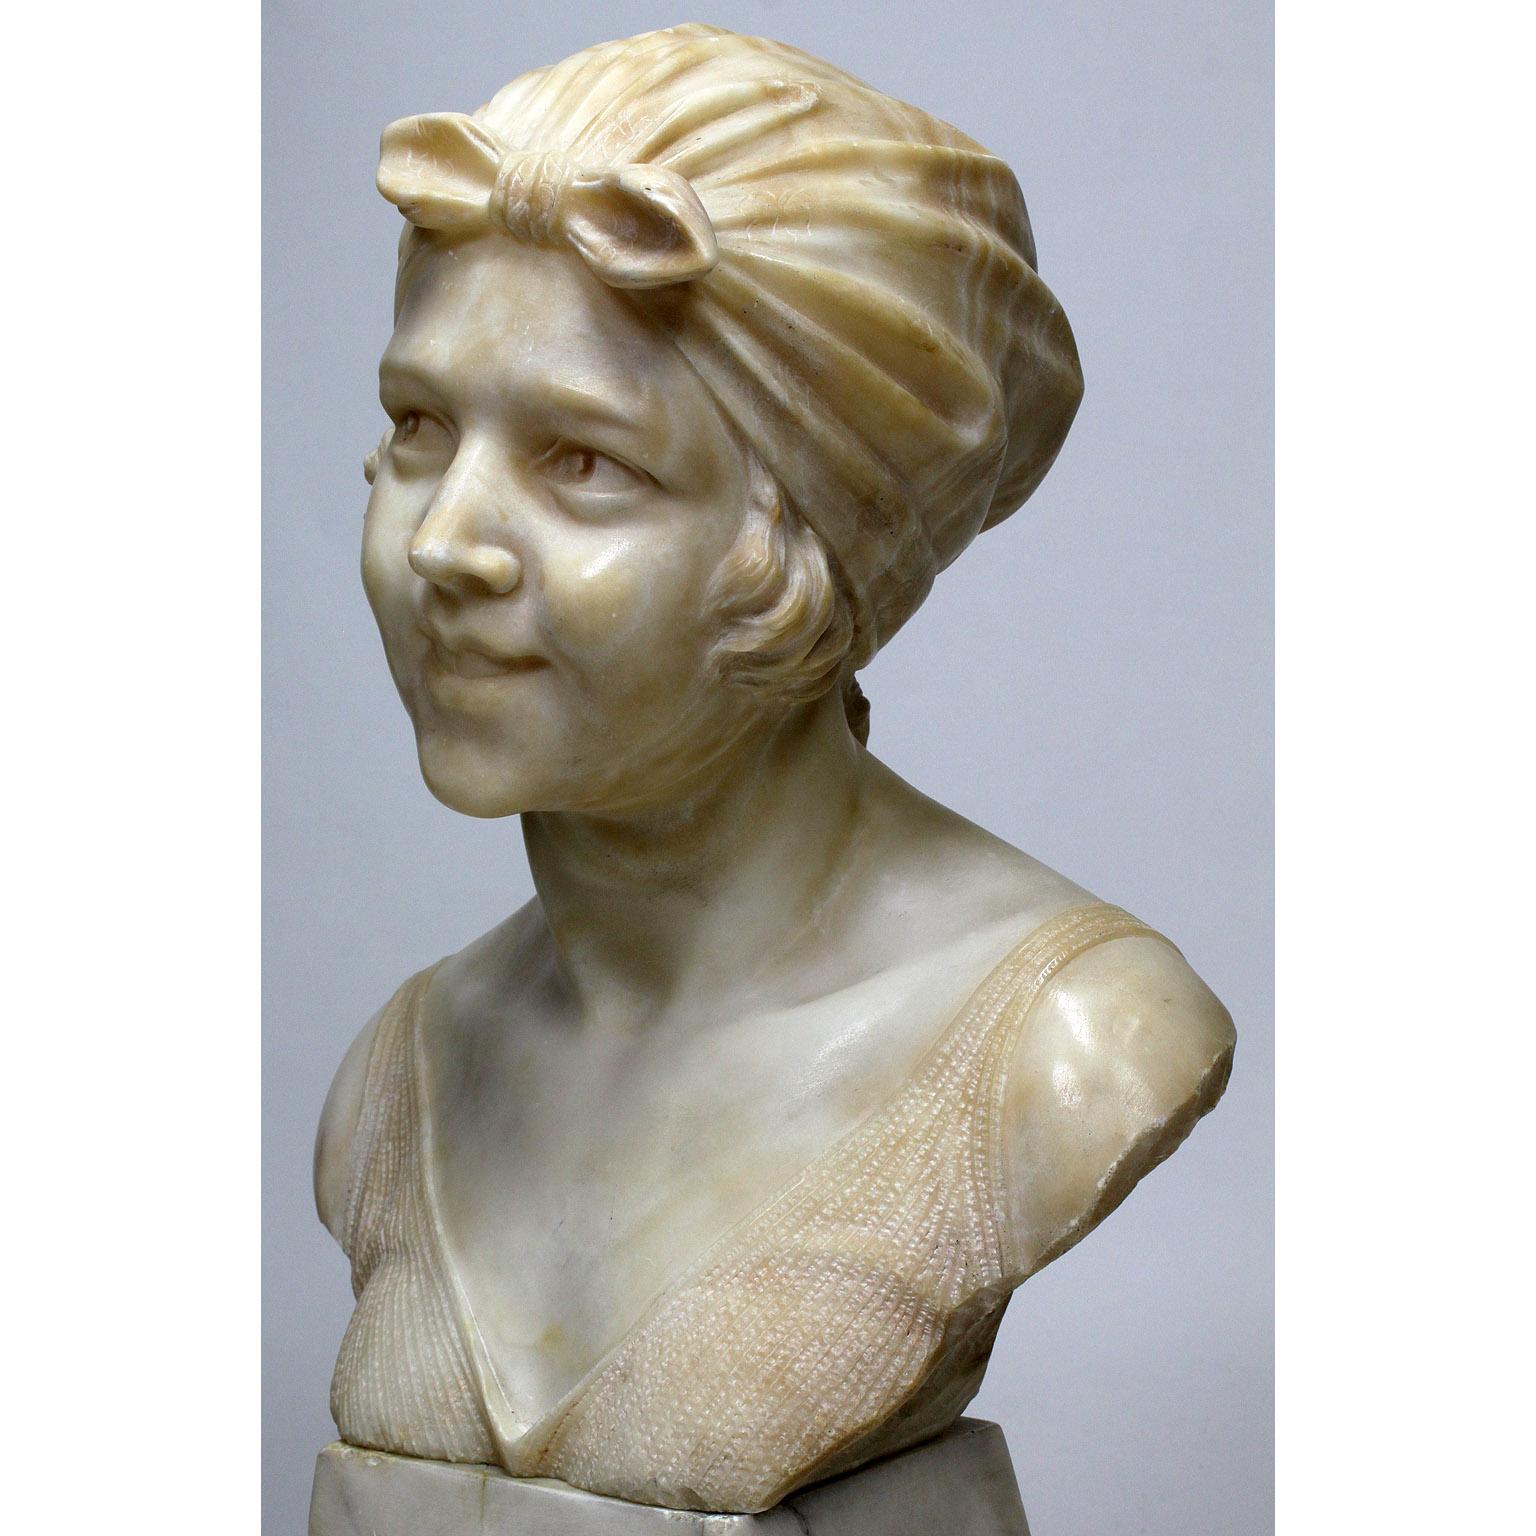  Italian 19th-20th Century Carved Alabaster Bust of a Young Girl with a Bandana For Sale 1